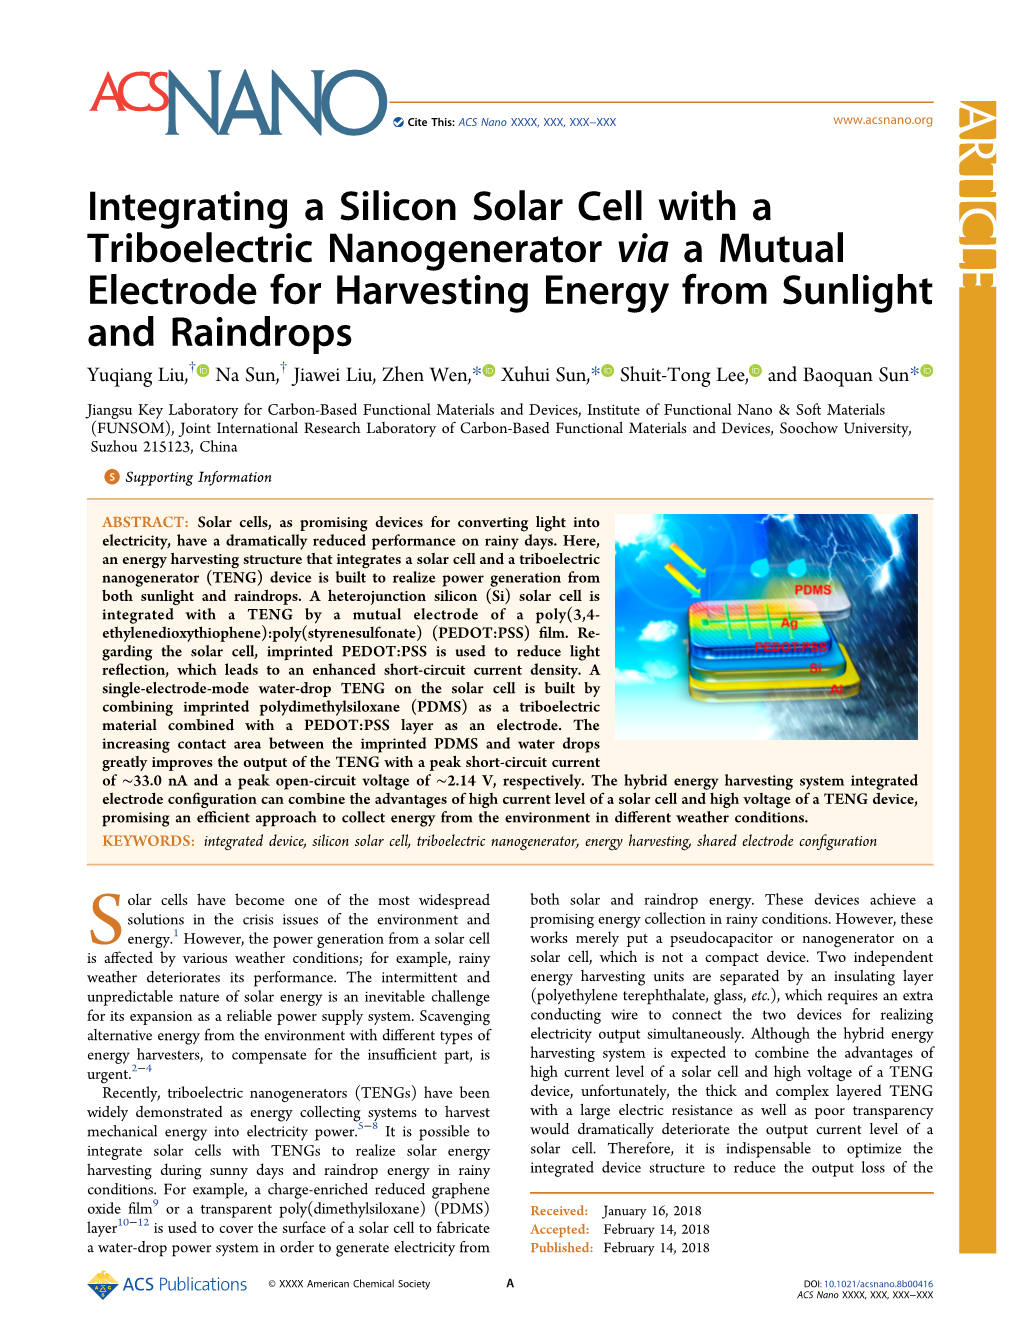 Integrating a Silicon Solar Cell with a Triboelectric Nanogenerator Via A